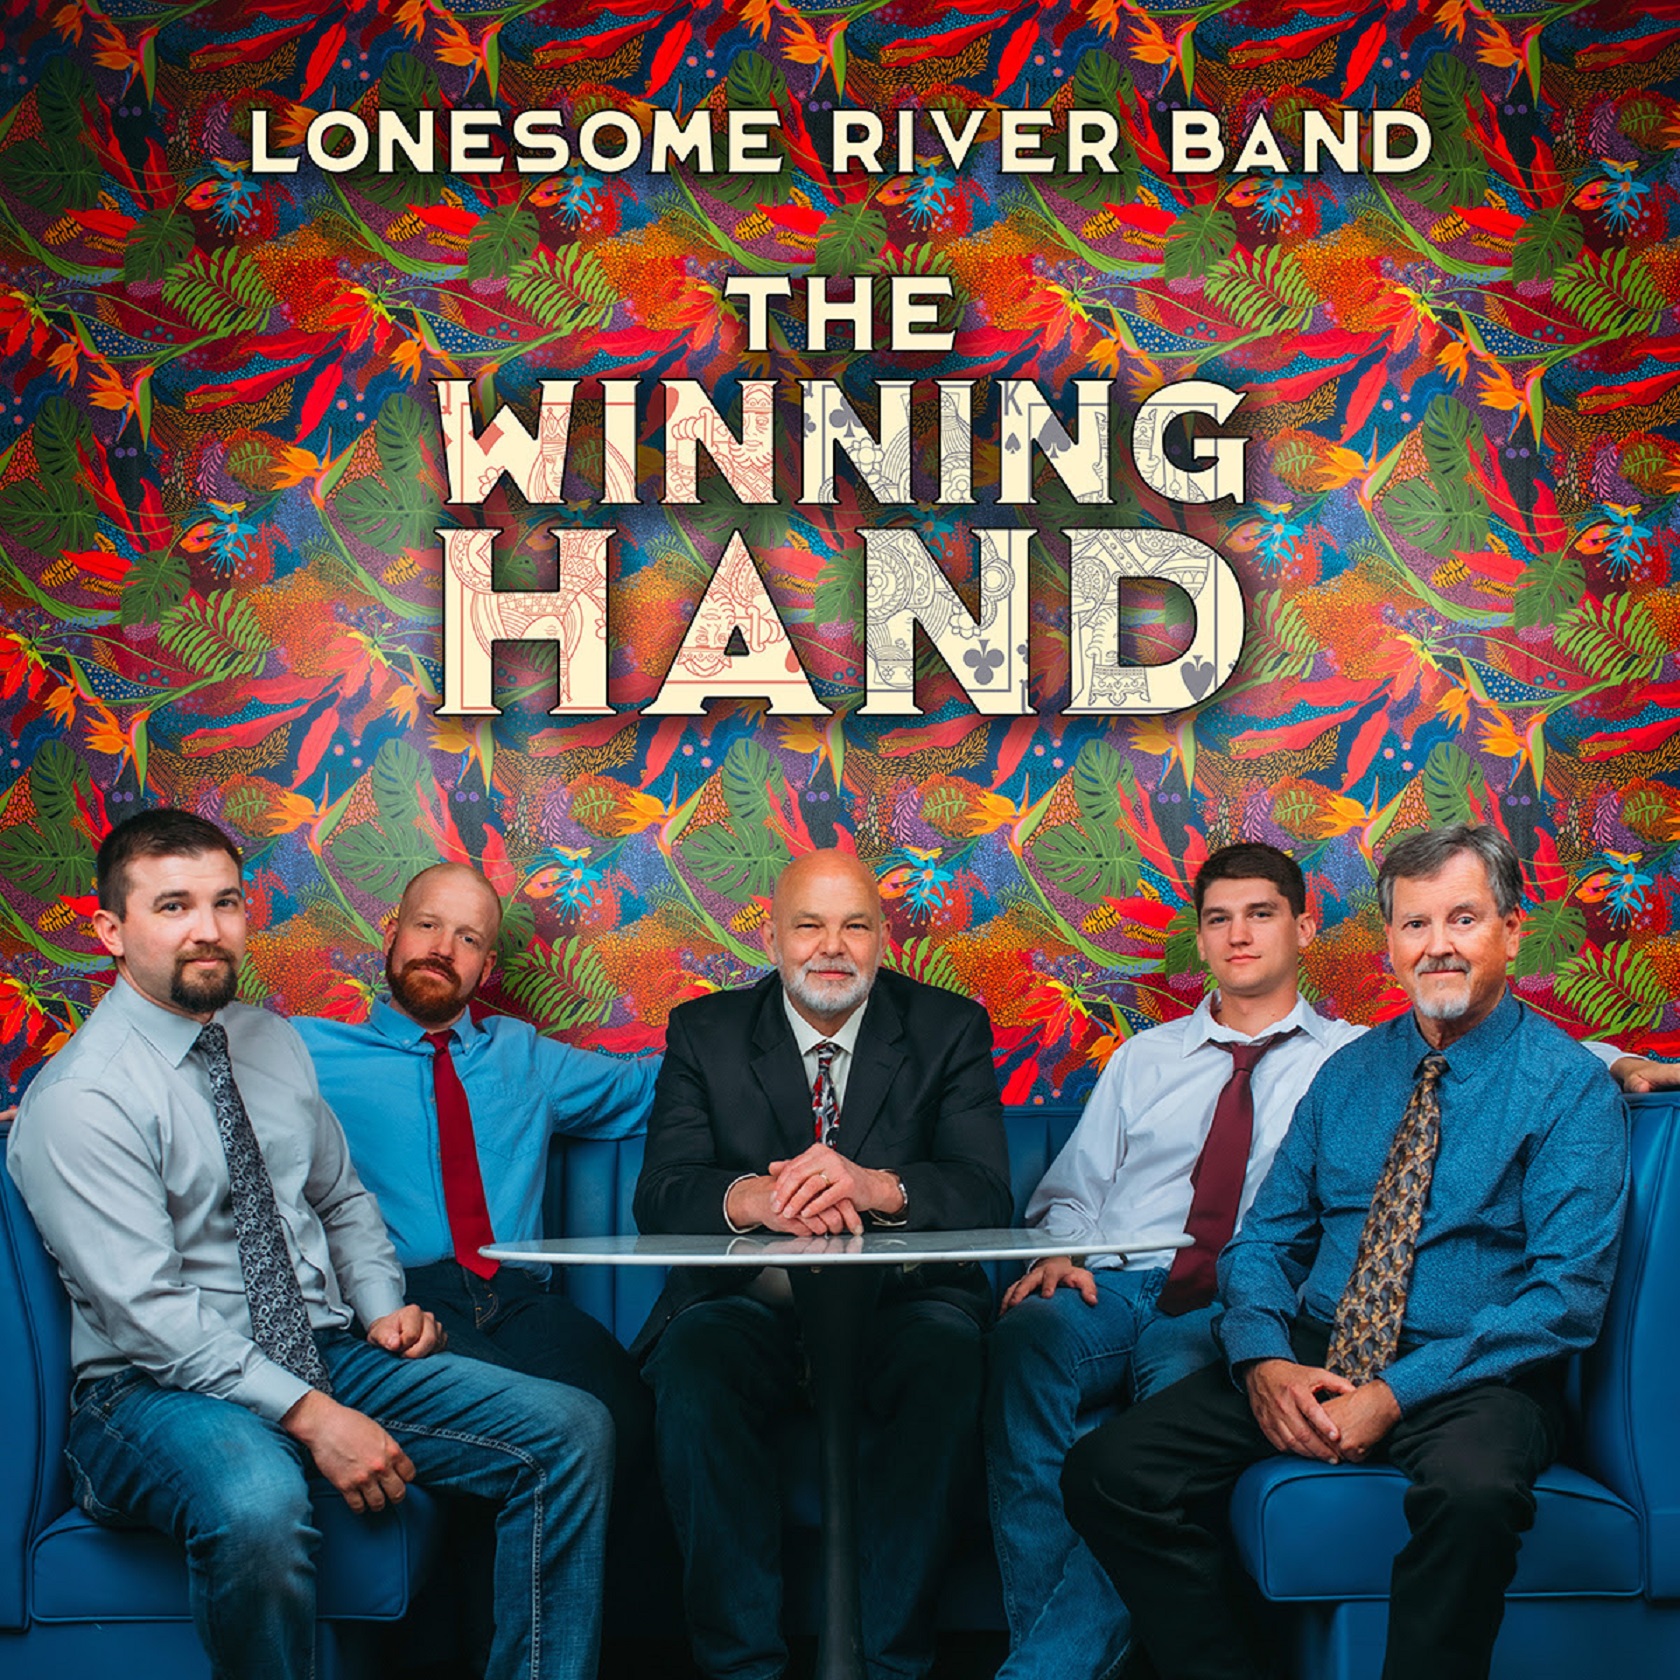 Lonesome River Band announces upcoming album, The Winning Hand